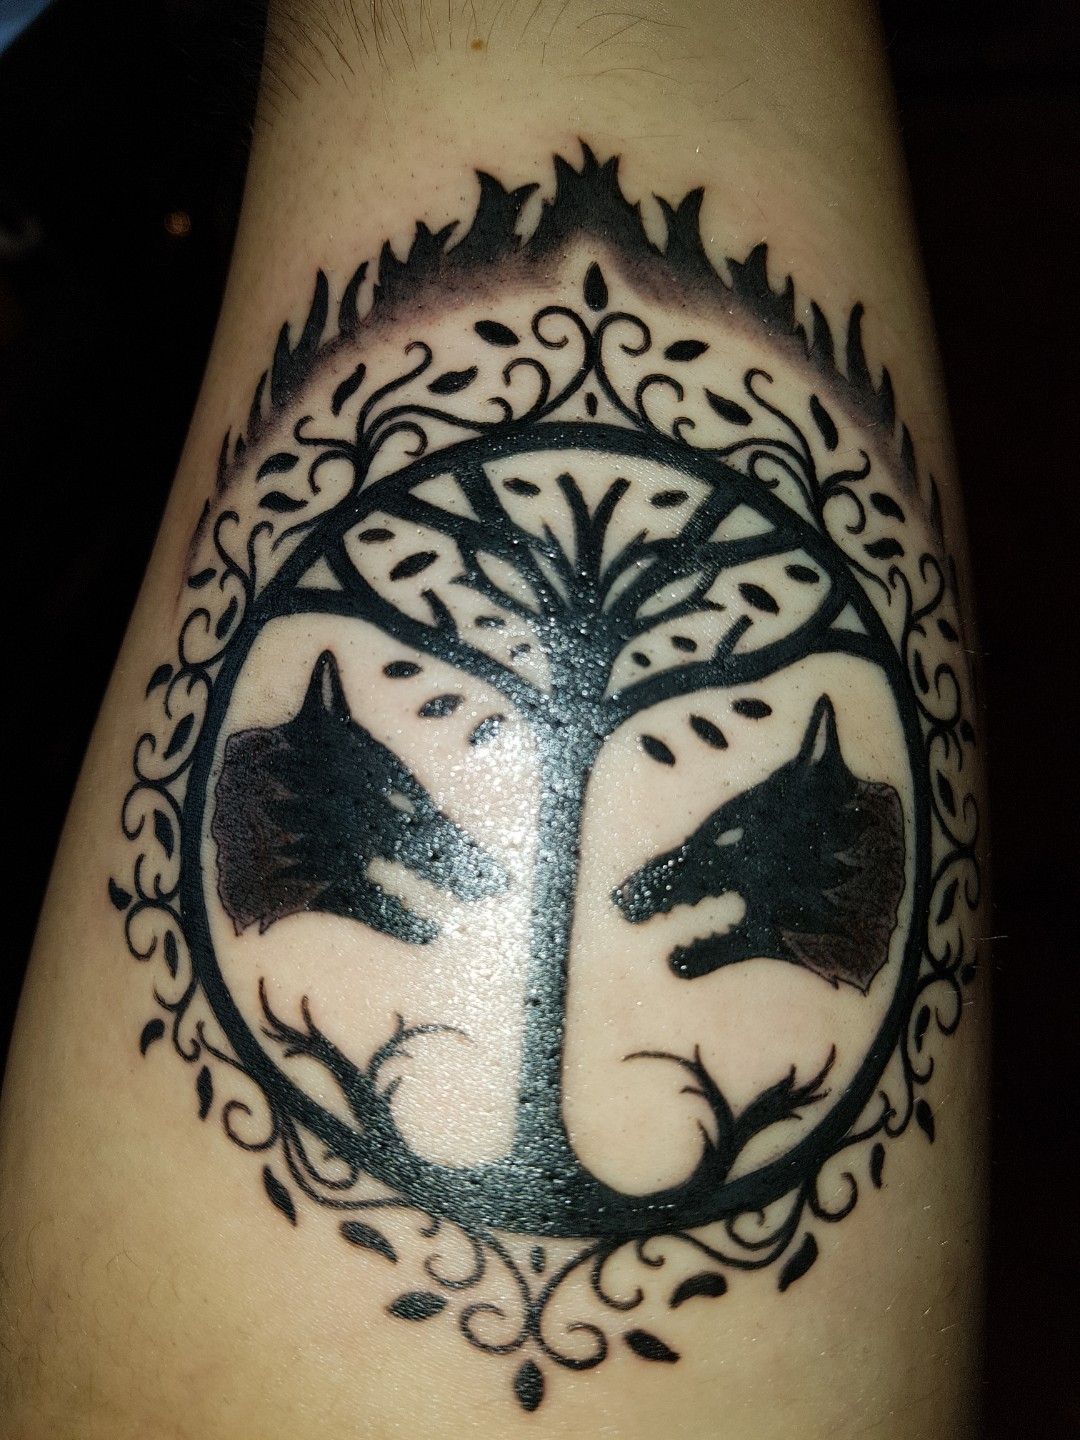 Got a destiny tattoo too represent all the friends I made through this  awesome game and thought I would share  rdestiny2